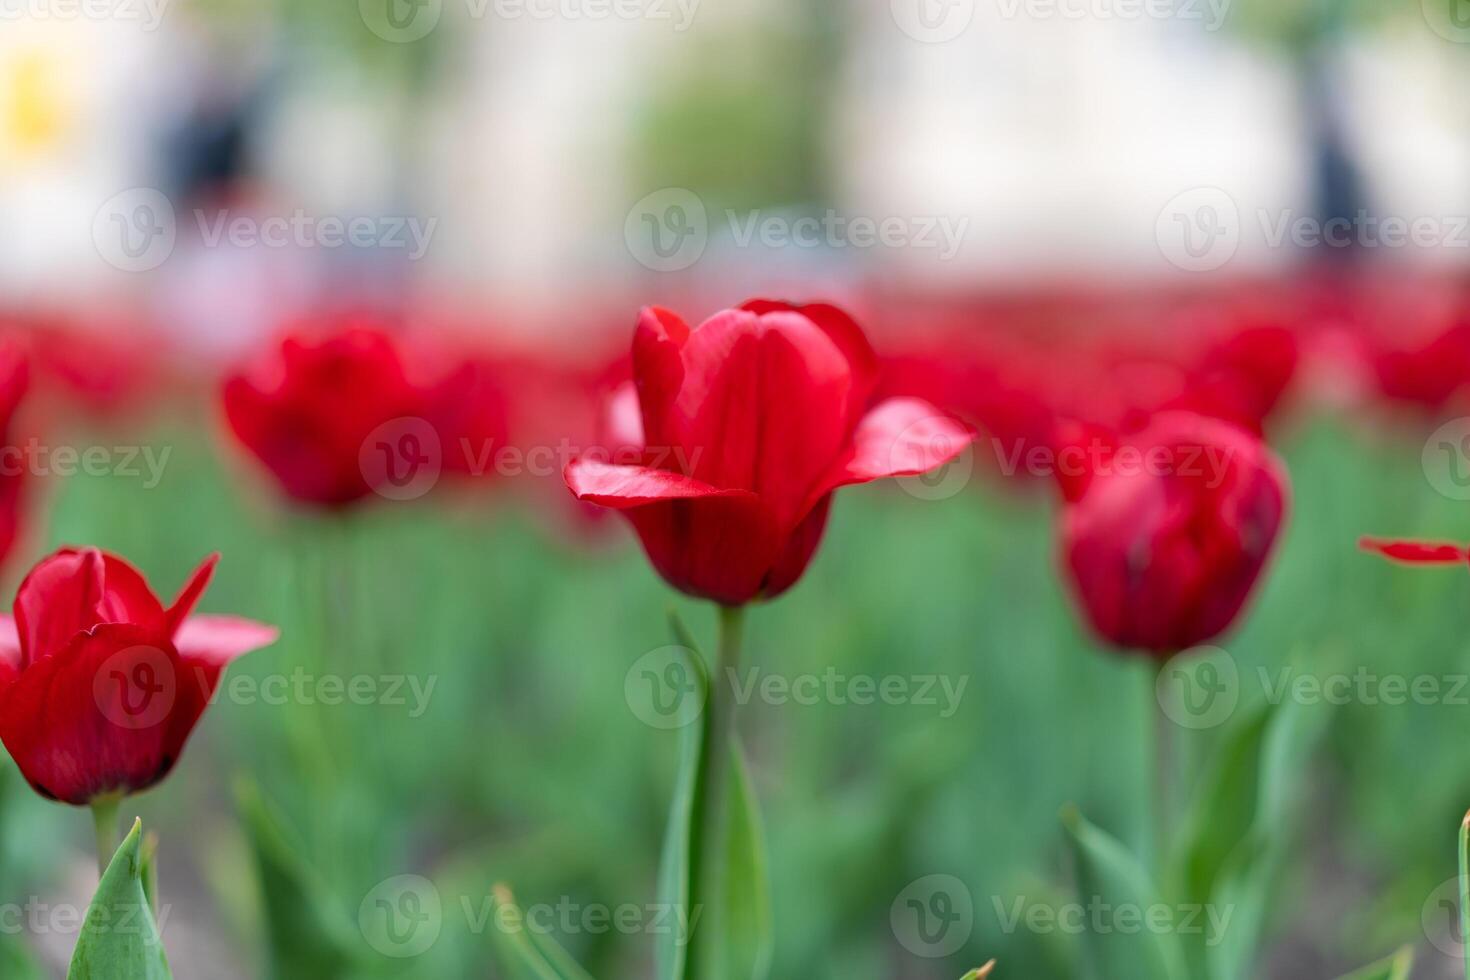 Red tulip flowers background outdoor photo